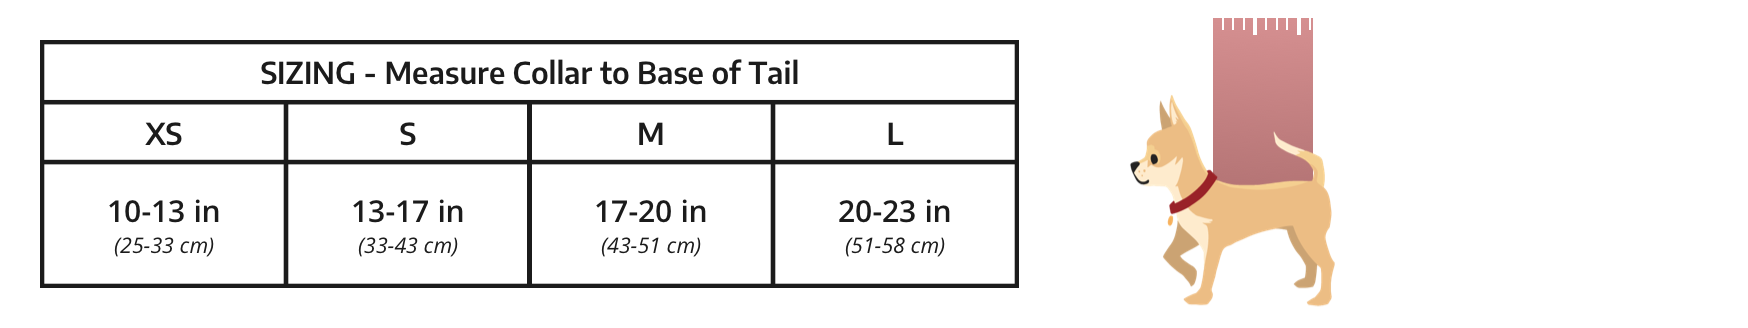 AIR 2 Sizing, measuring from the collar to the base of the tail: XS 10-13 inches; S 13-17 inches; M 17-20 inches; L 20-23 inches.